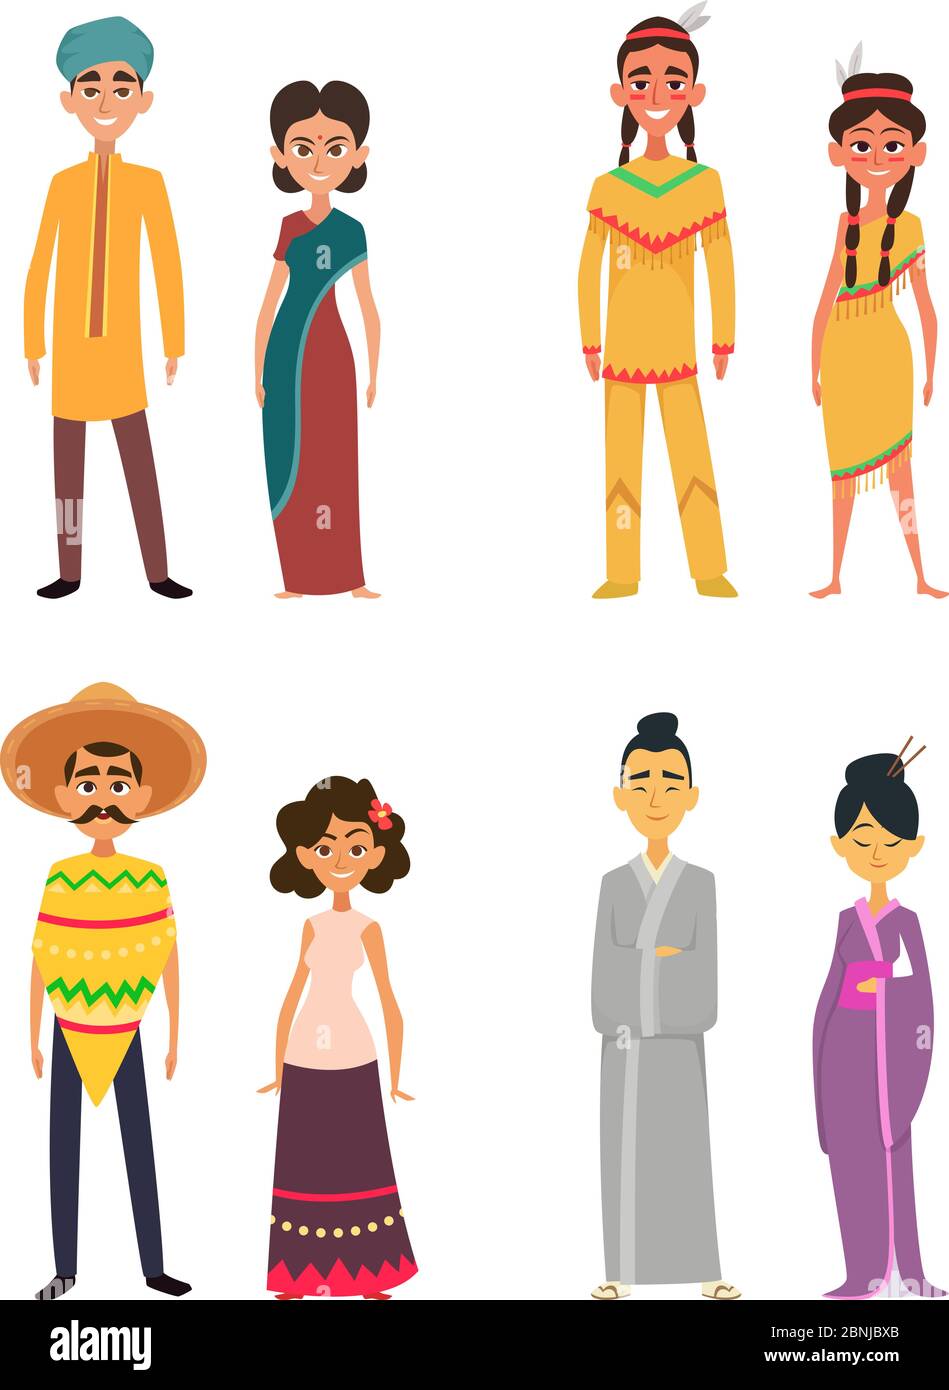 International group of peoples male and female. Characters of different nationalities Stock Vector